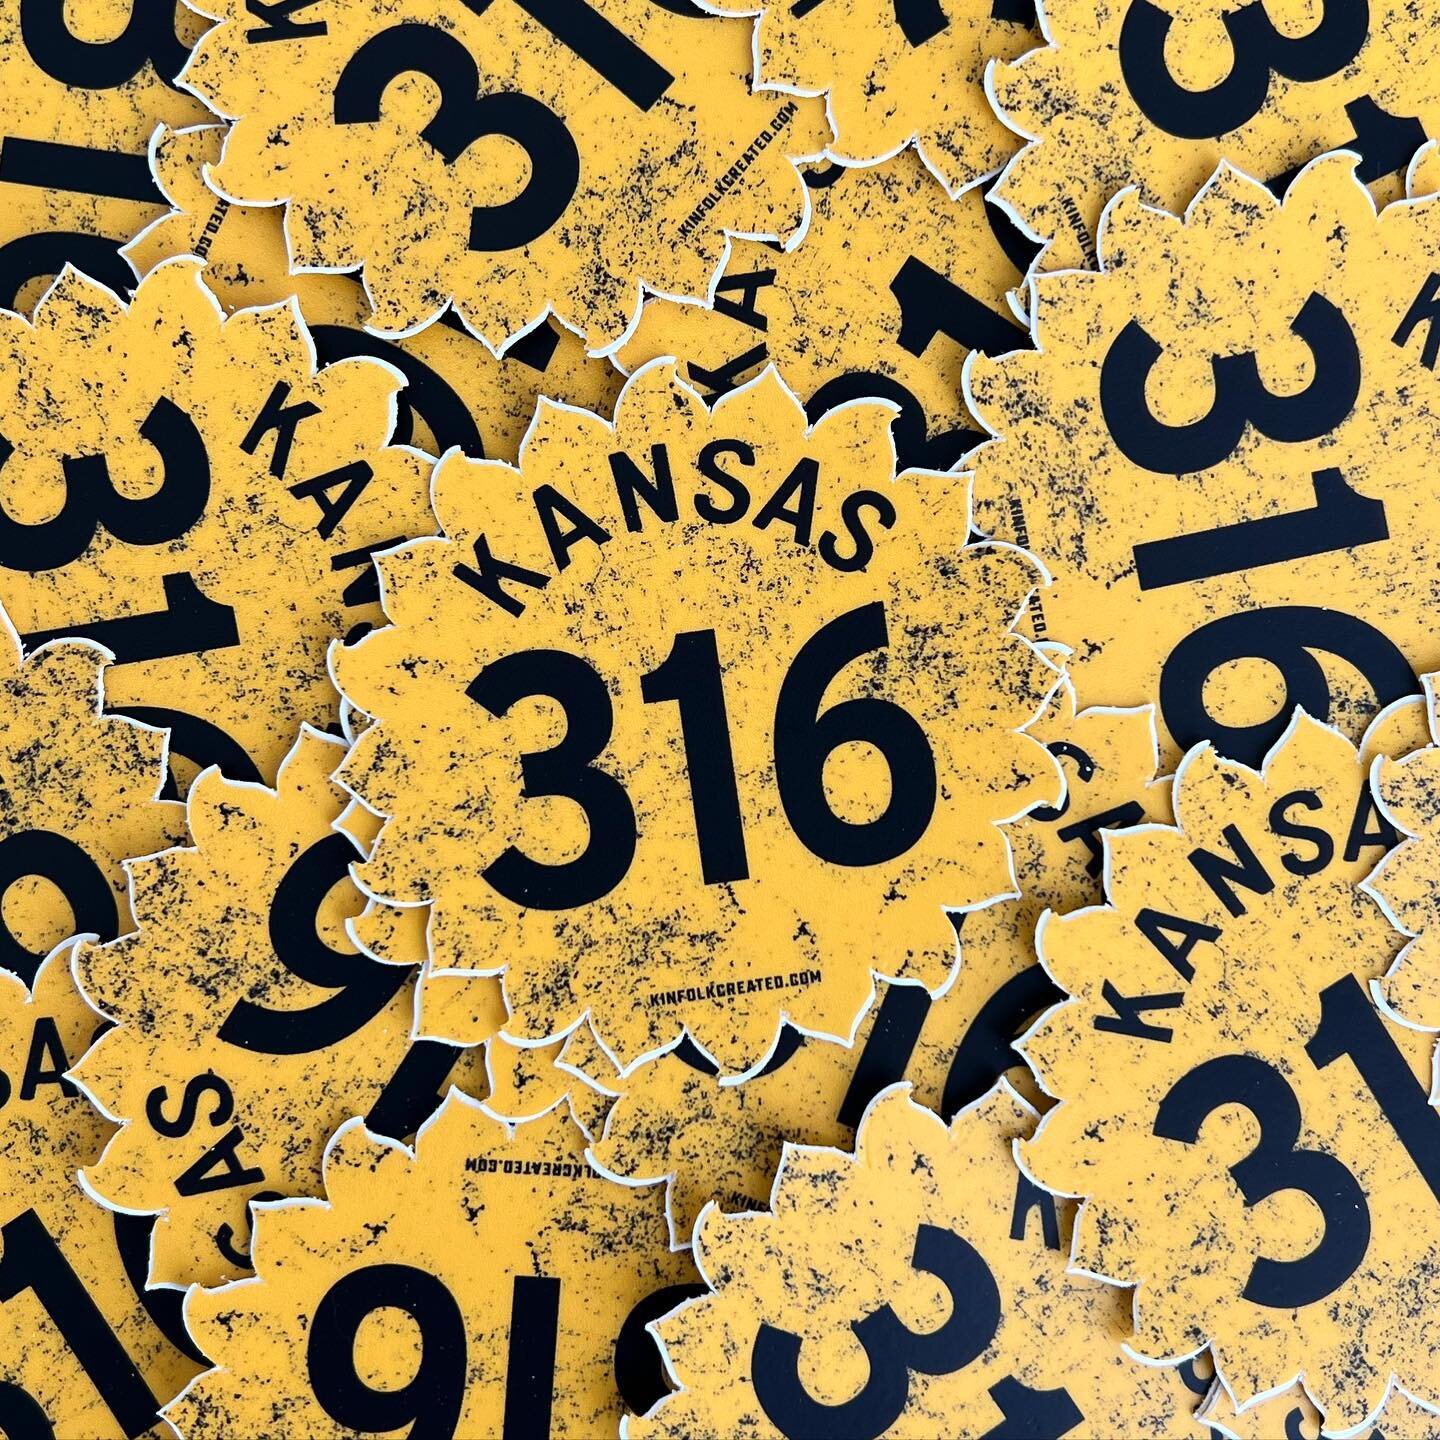 3-1-6 DAY! ❤️
&mdash;
It happens only once a year so SHOUT IT OUT for ALL to hear! 📣 #316day #kansas
&mdash;
#kinfolkcreated #stickers #areacode #lovewhereyoulive #explorekansas #midwest #316 #heartland #ict